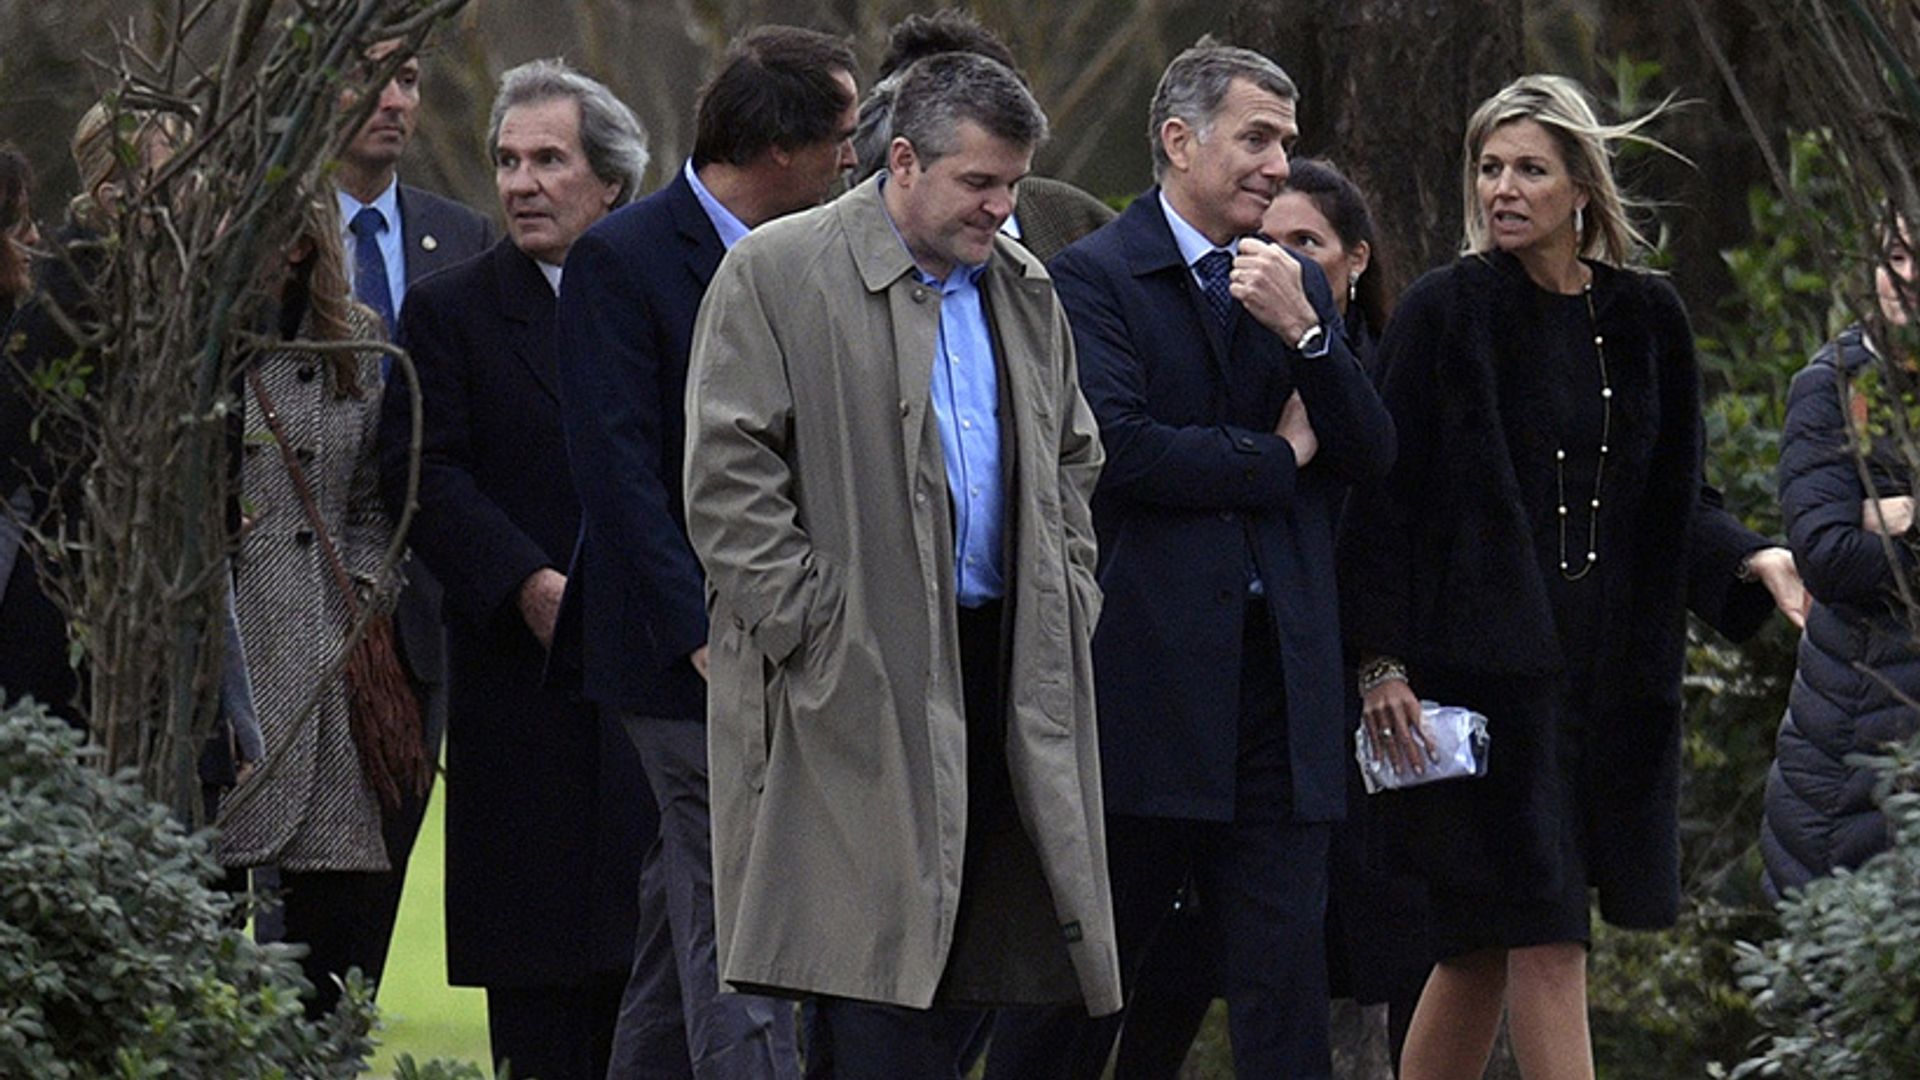 Dutch royal family attend funeral of Queen Máxima's father in Argentina